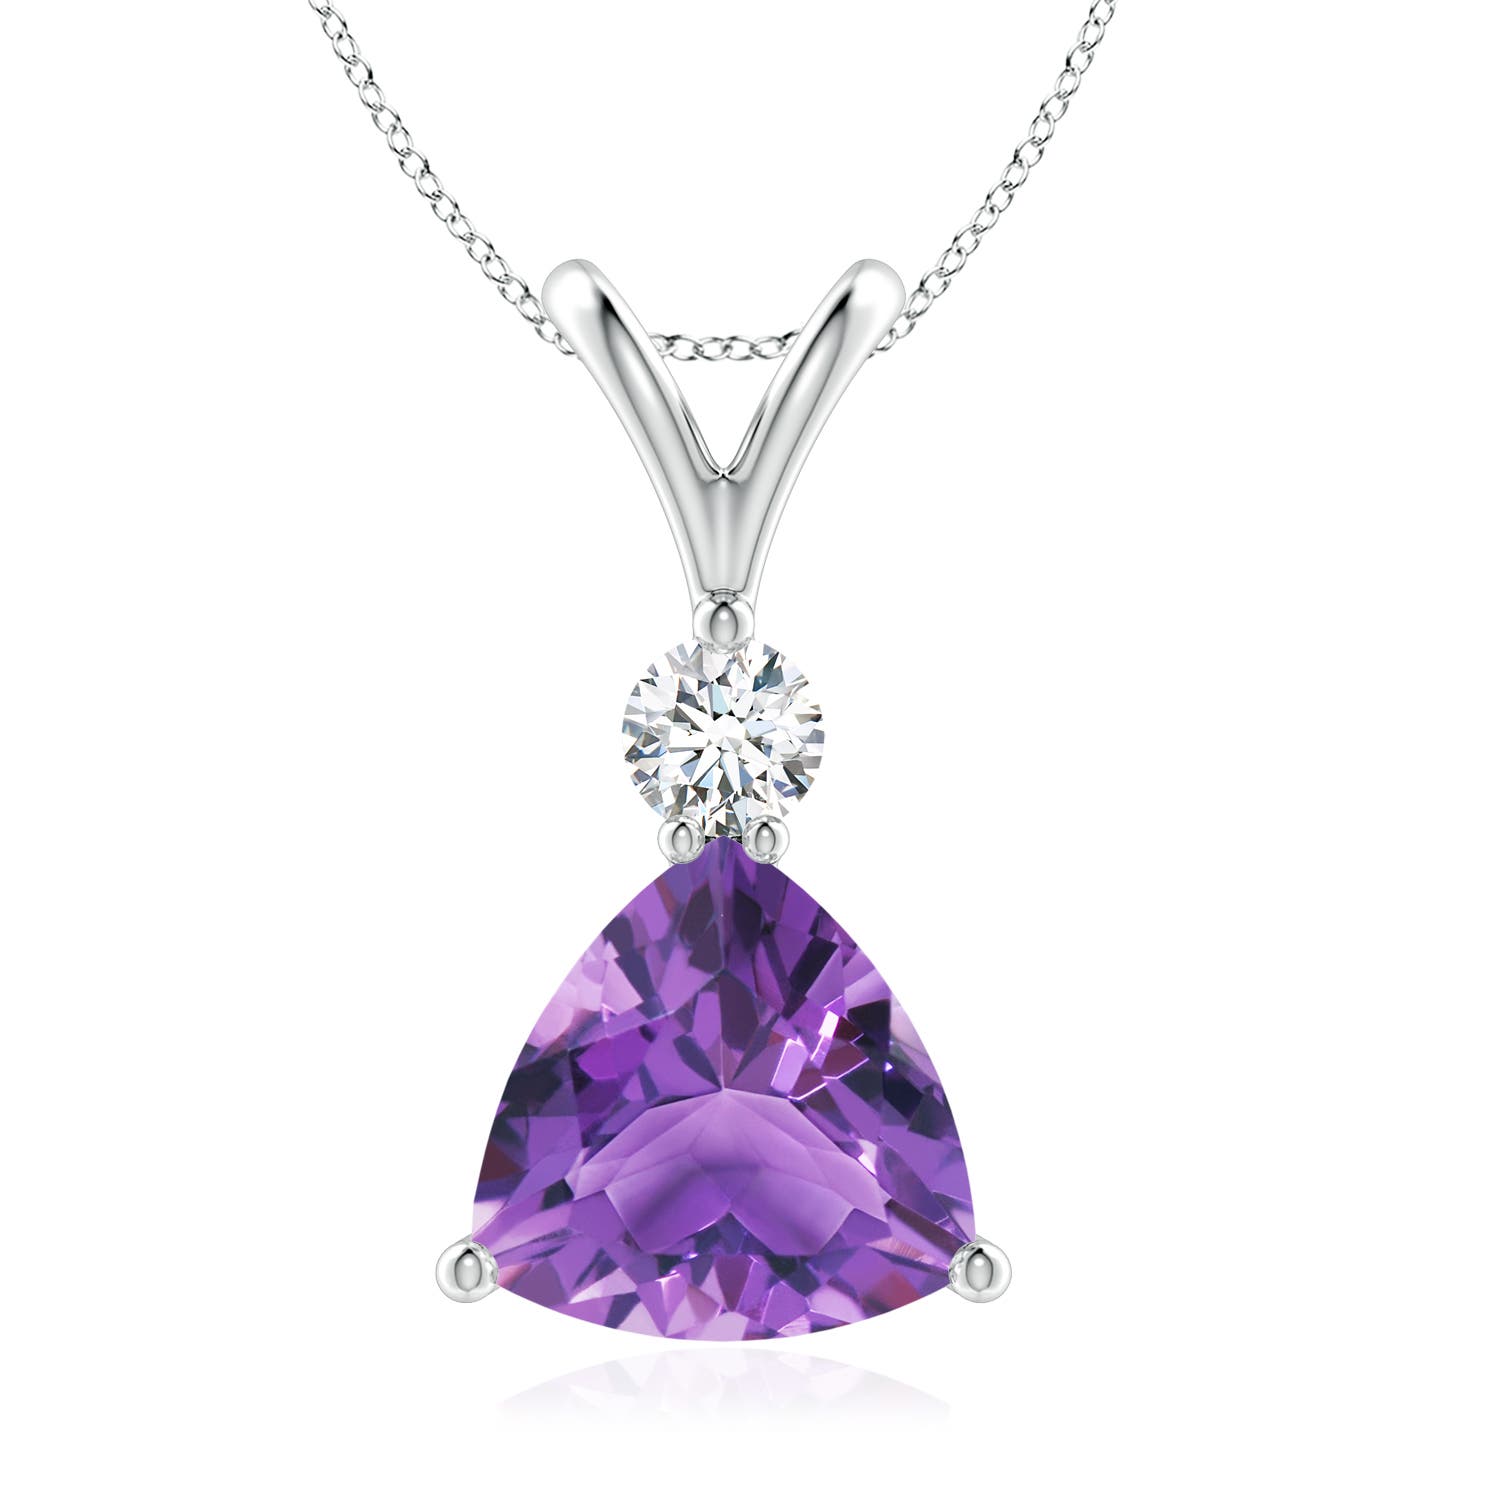 AA - Amethyst / 1.75 CT / 14 KT White Gold